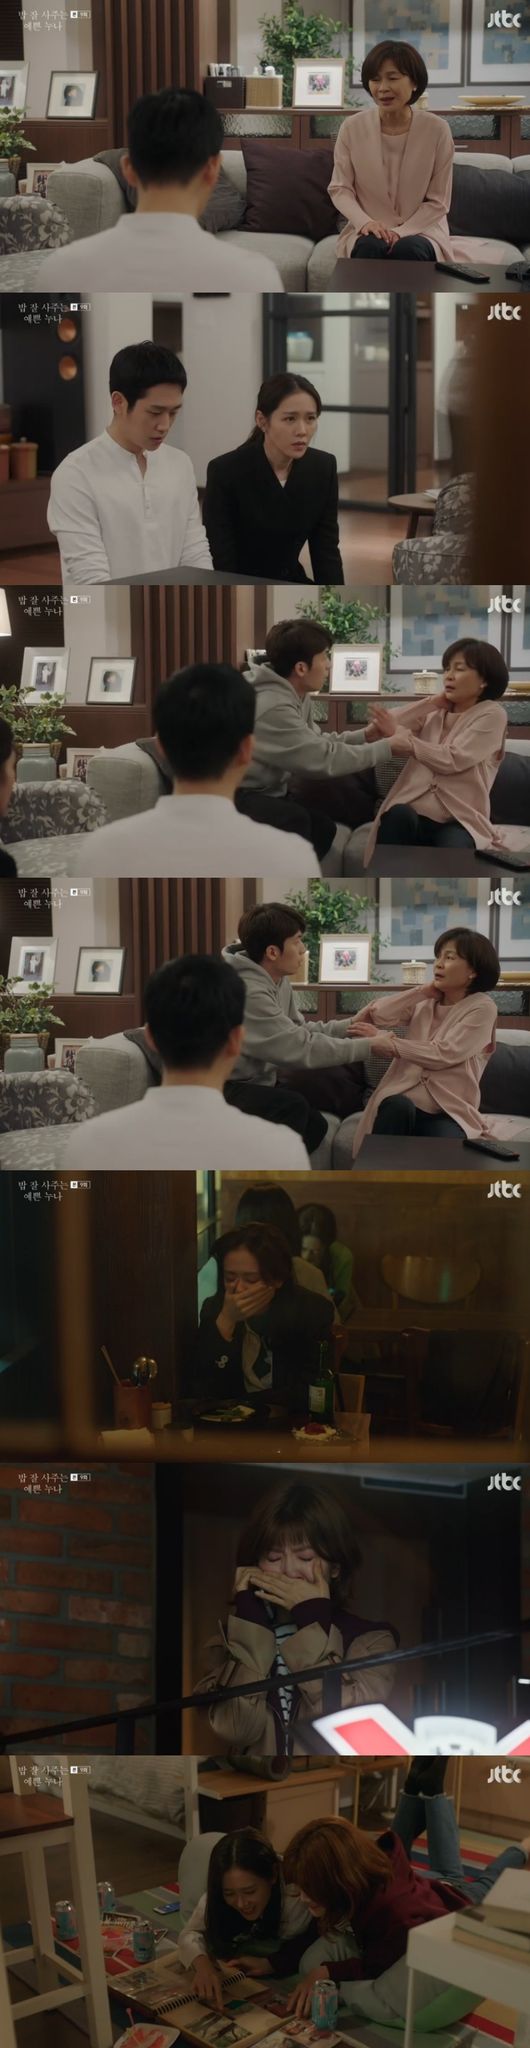 Jung Hae In and Son Ye-jin revealed their friendship with Hae-yoen Gil. JTBC Bob-sweet sister broadcasted on the 27th showed the picture of Primary selection that noticed between Junhee and Jina.The Primary Election is confident to see Jin-ah in Jun-hees sketchbook. On that evening, Jun-hee knows that Jin-ah has gone to the room of the Primary Election, but the Primary Election pretends to sleep.The next day, Primary Election goes to the mothers cemetery and says, I can not see Junhees hard work. Junhee finds out that she noticed her relationship with Jin-a when Primary Election kept avoiding herself.Junhee tells this fact to Jina, and Jinha visits Primary Election. The two of them talked about shochu.Primary selection was do you play with our Junhee? And Jina said, I like more. Primary selection said, I do not know how I have spent these days.I was so tired of betrayal. Jin-ah said frankly that she was sorry, but she had only seen Jun-hee.At that time, Junhee called Primary Election and said, Jin-ah is not good, I shook.So do not make it too hard. When you hear that, Primary selection tears, and you go back to the bar.Eventually, the Primary Election decides to understand Jin-ah, and the two make peace.Junhee smiles when he finds out that the two have reconciled. A few days later Yang Seung-ho calls Junhee to fix the computer, and Jina rushes to leave work when Junhee comes.While Junhee is watching the computer, Mi-yeon goes out and comes in, shows Junhee and Yang Seung-ho a picture of a man and asks, How do you feel about the impression of Jin-ah? Junhee, who was uncomfortable with the place, eventually told Mi-yeon.Junhee kneels in front of Mi-yeon, Mi-yeon is embarrassed and says, Whats going on?At that time, Jin-ah comes in, and Jin-ah falls to his knees next to Jun-hee. Mi-yeon is embarrassed and catches the back of his neck saying, Do not tell me, you two are ....When Yang Seung-ho surprised and grabbed Mi-yeon, Are you okay? Mi-yeon hit Yang Seung-ho, exploding anger, Did you know?